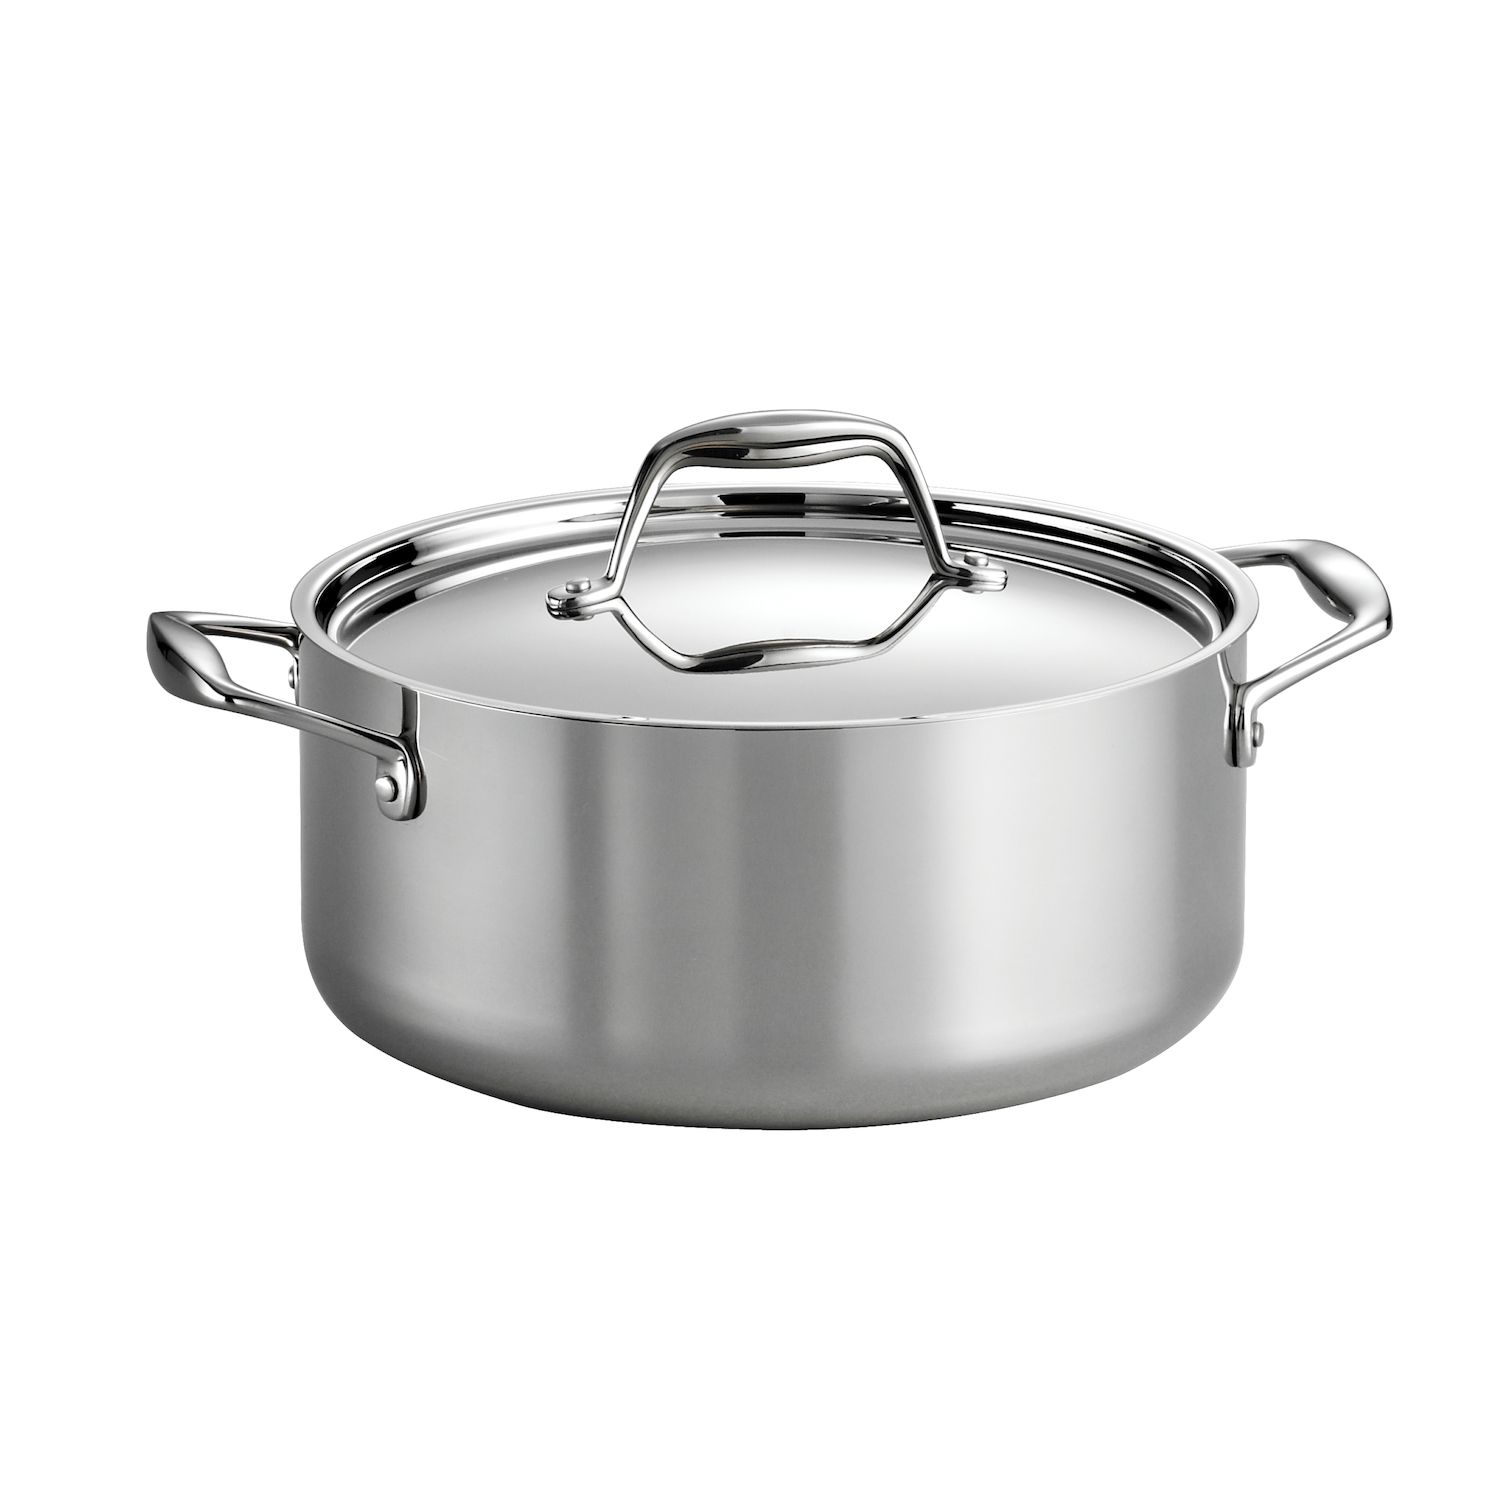 Oster Sangerfield 5 Quart Stainless Steel Pasta Pot with Strainer